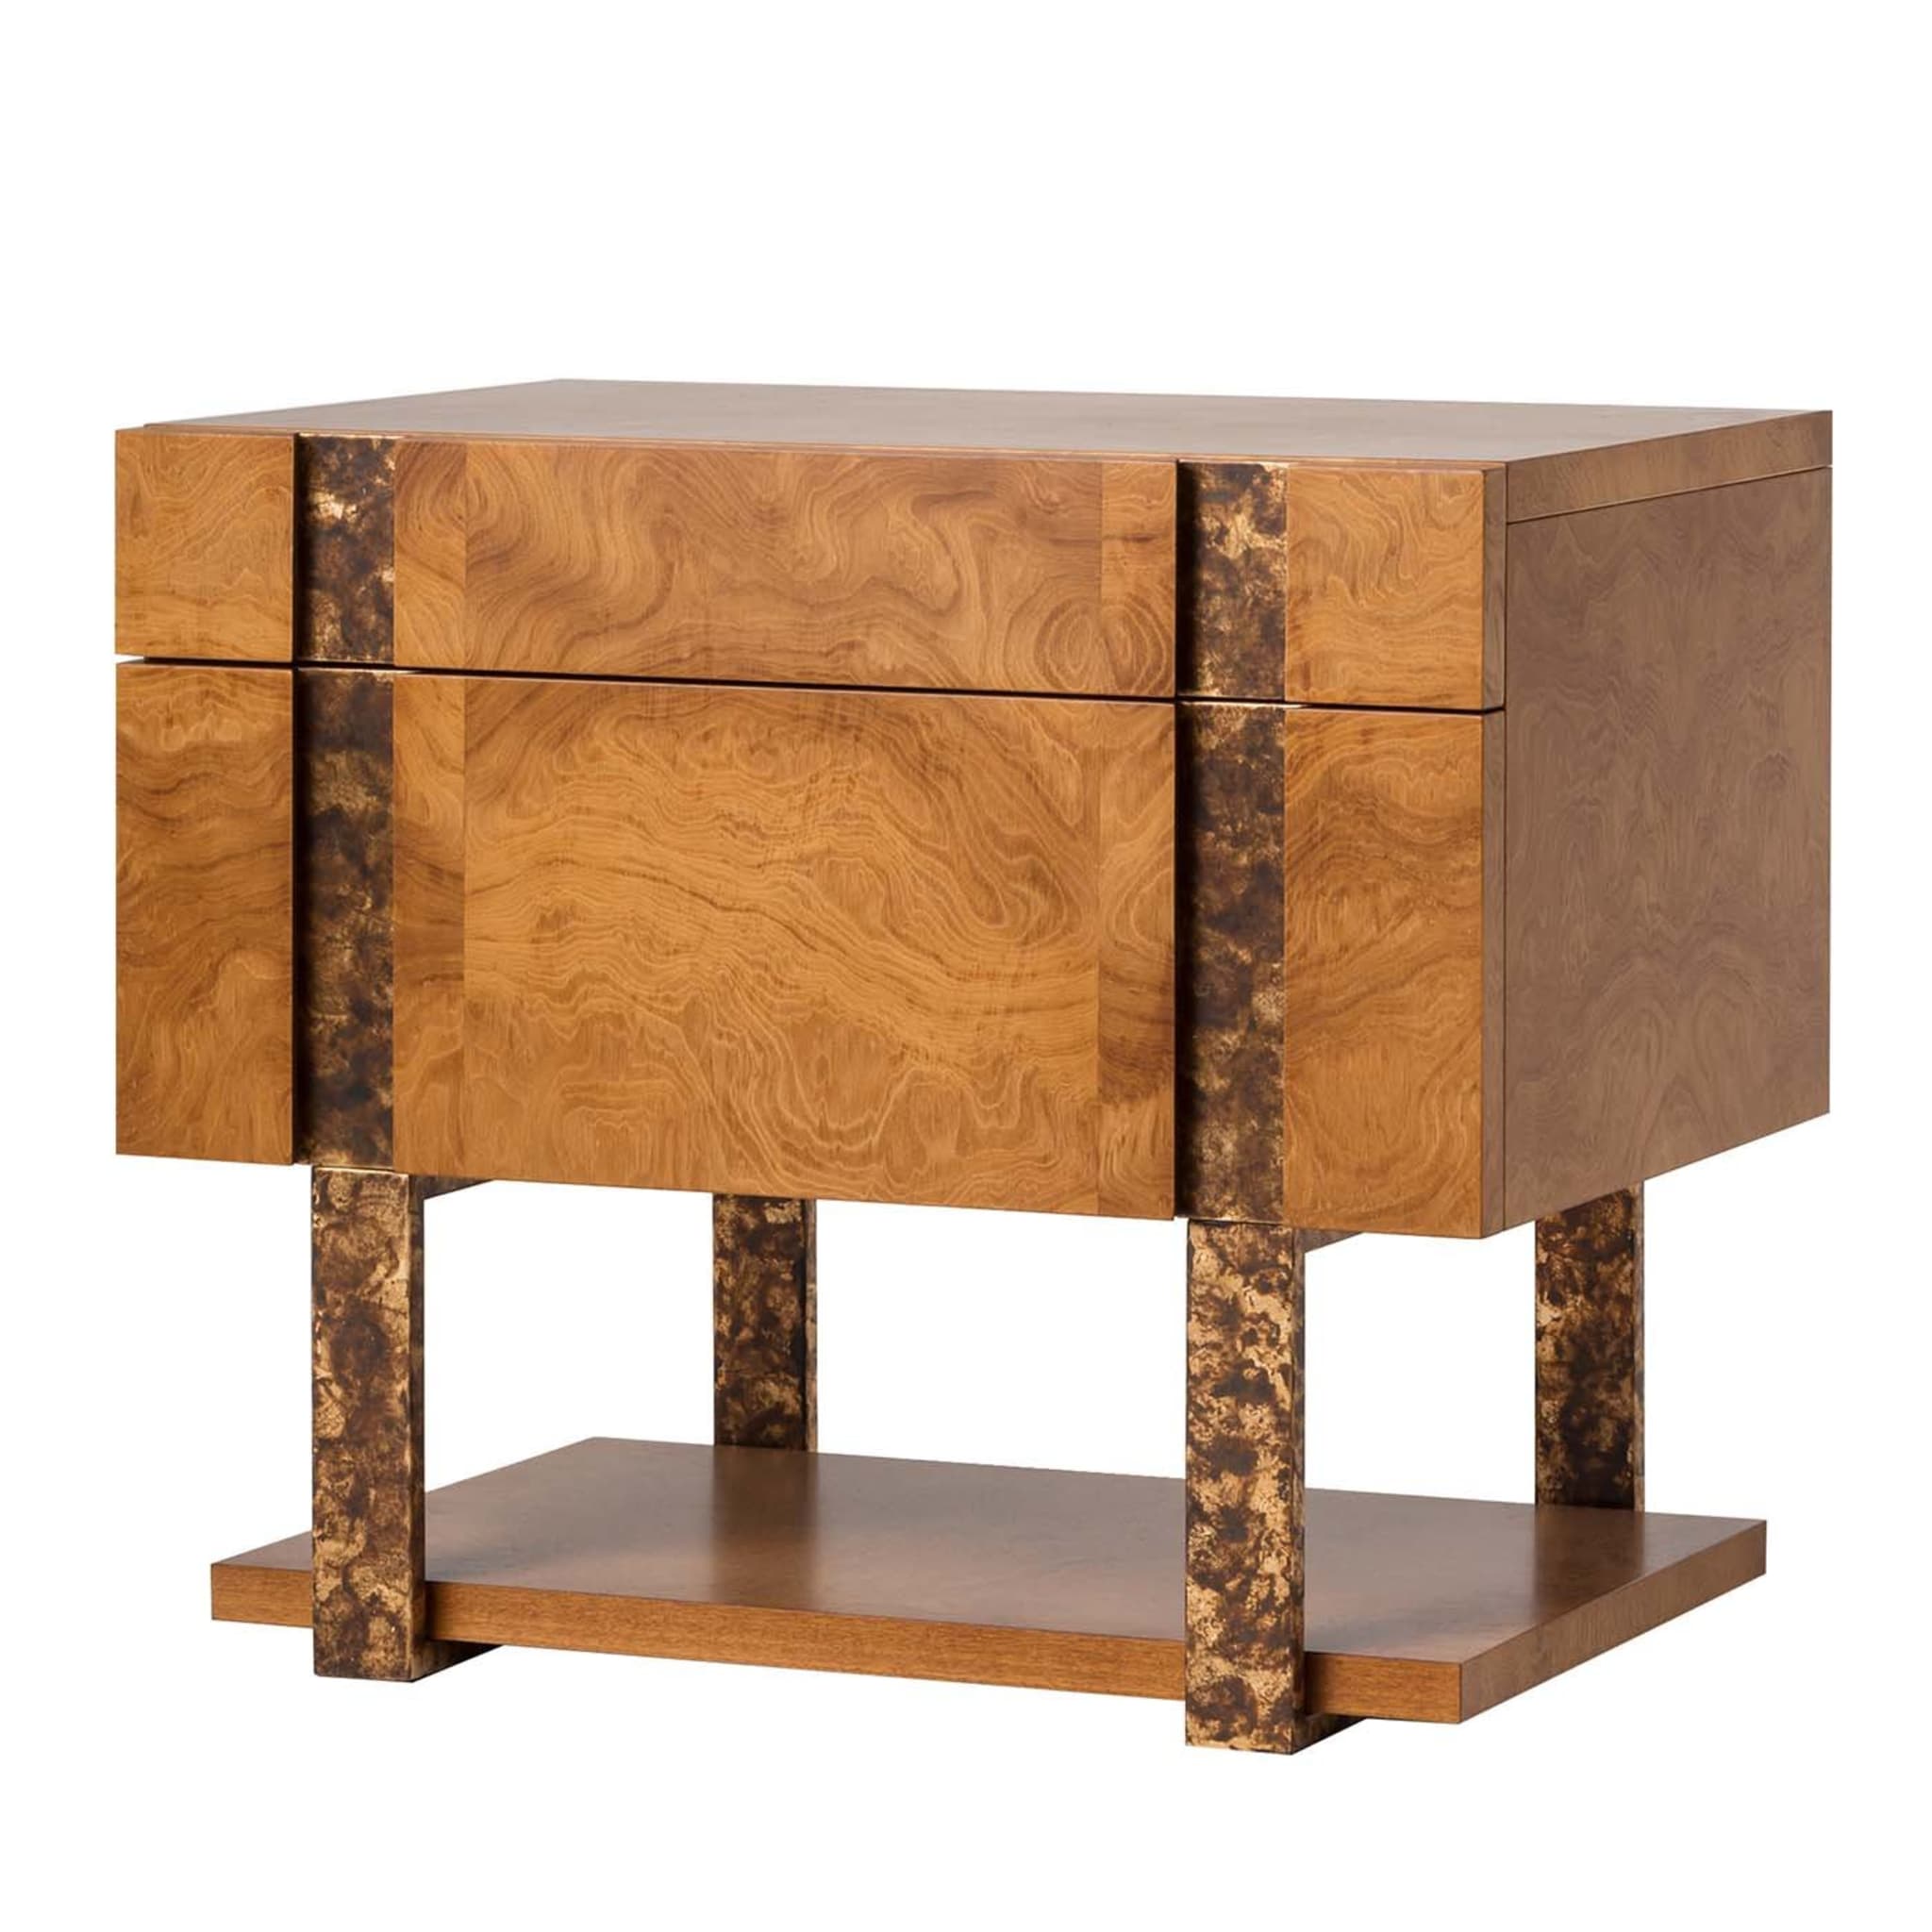 Diadema bedside table by Marco and Giulio Mantellassi - Main view